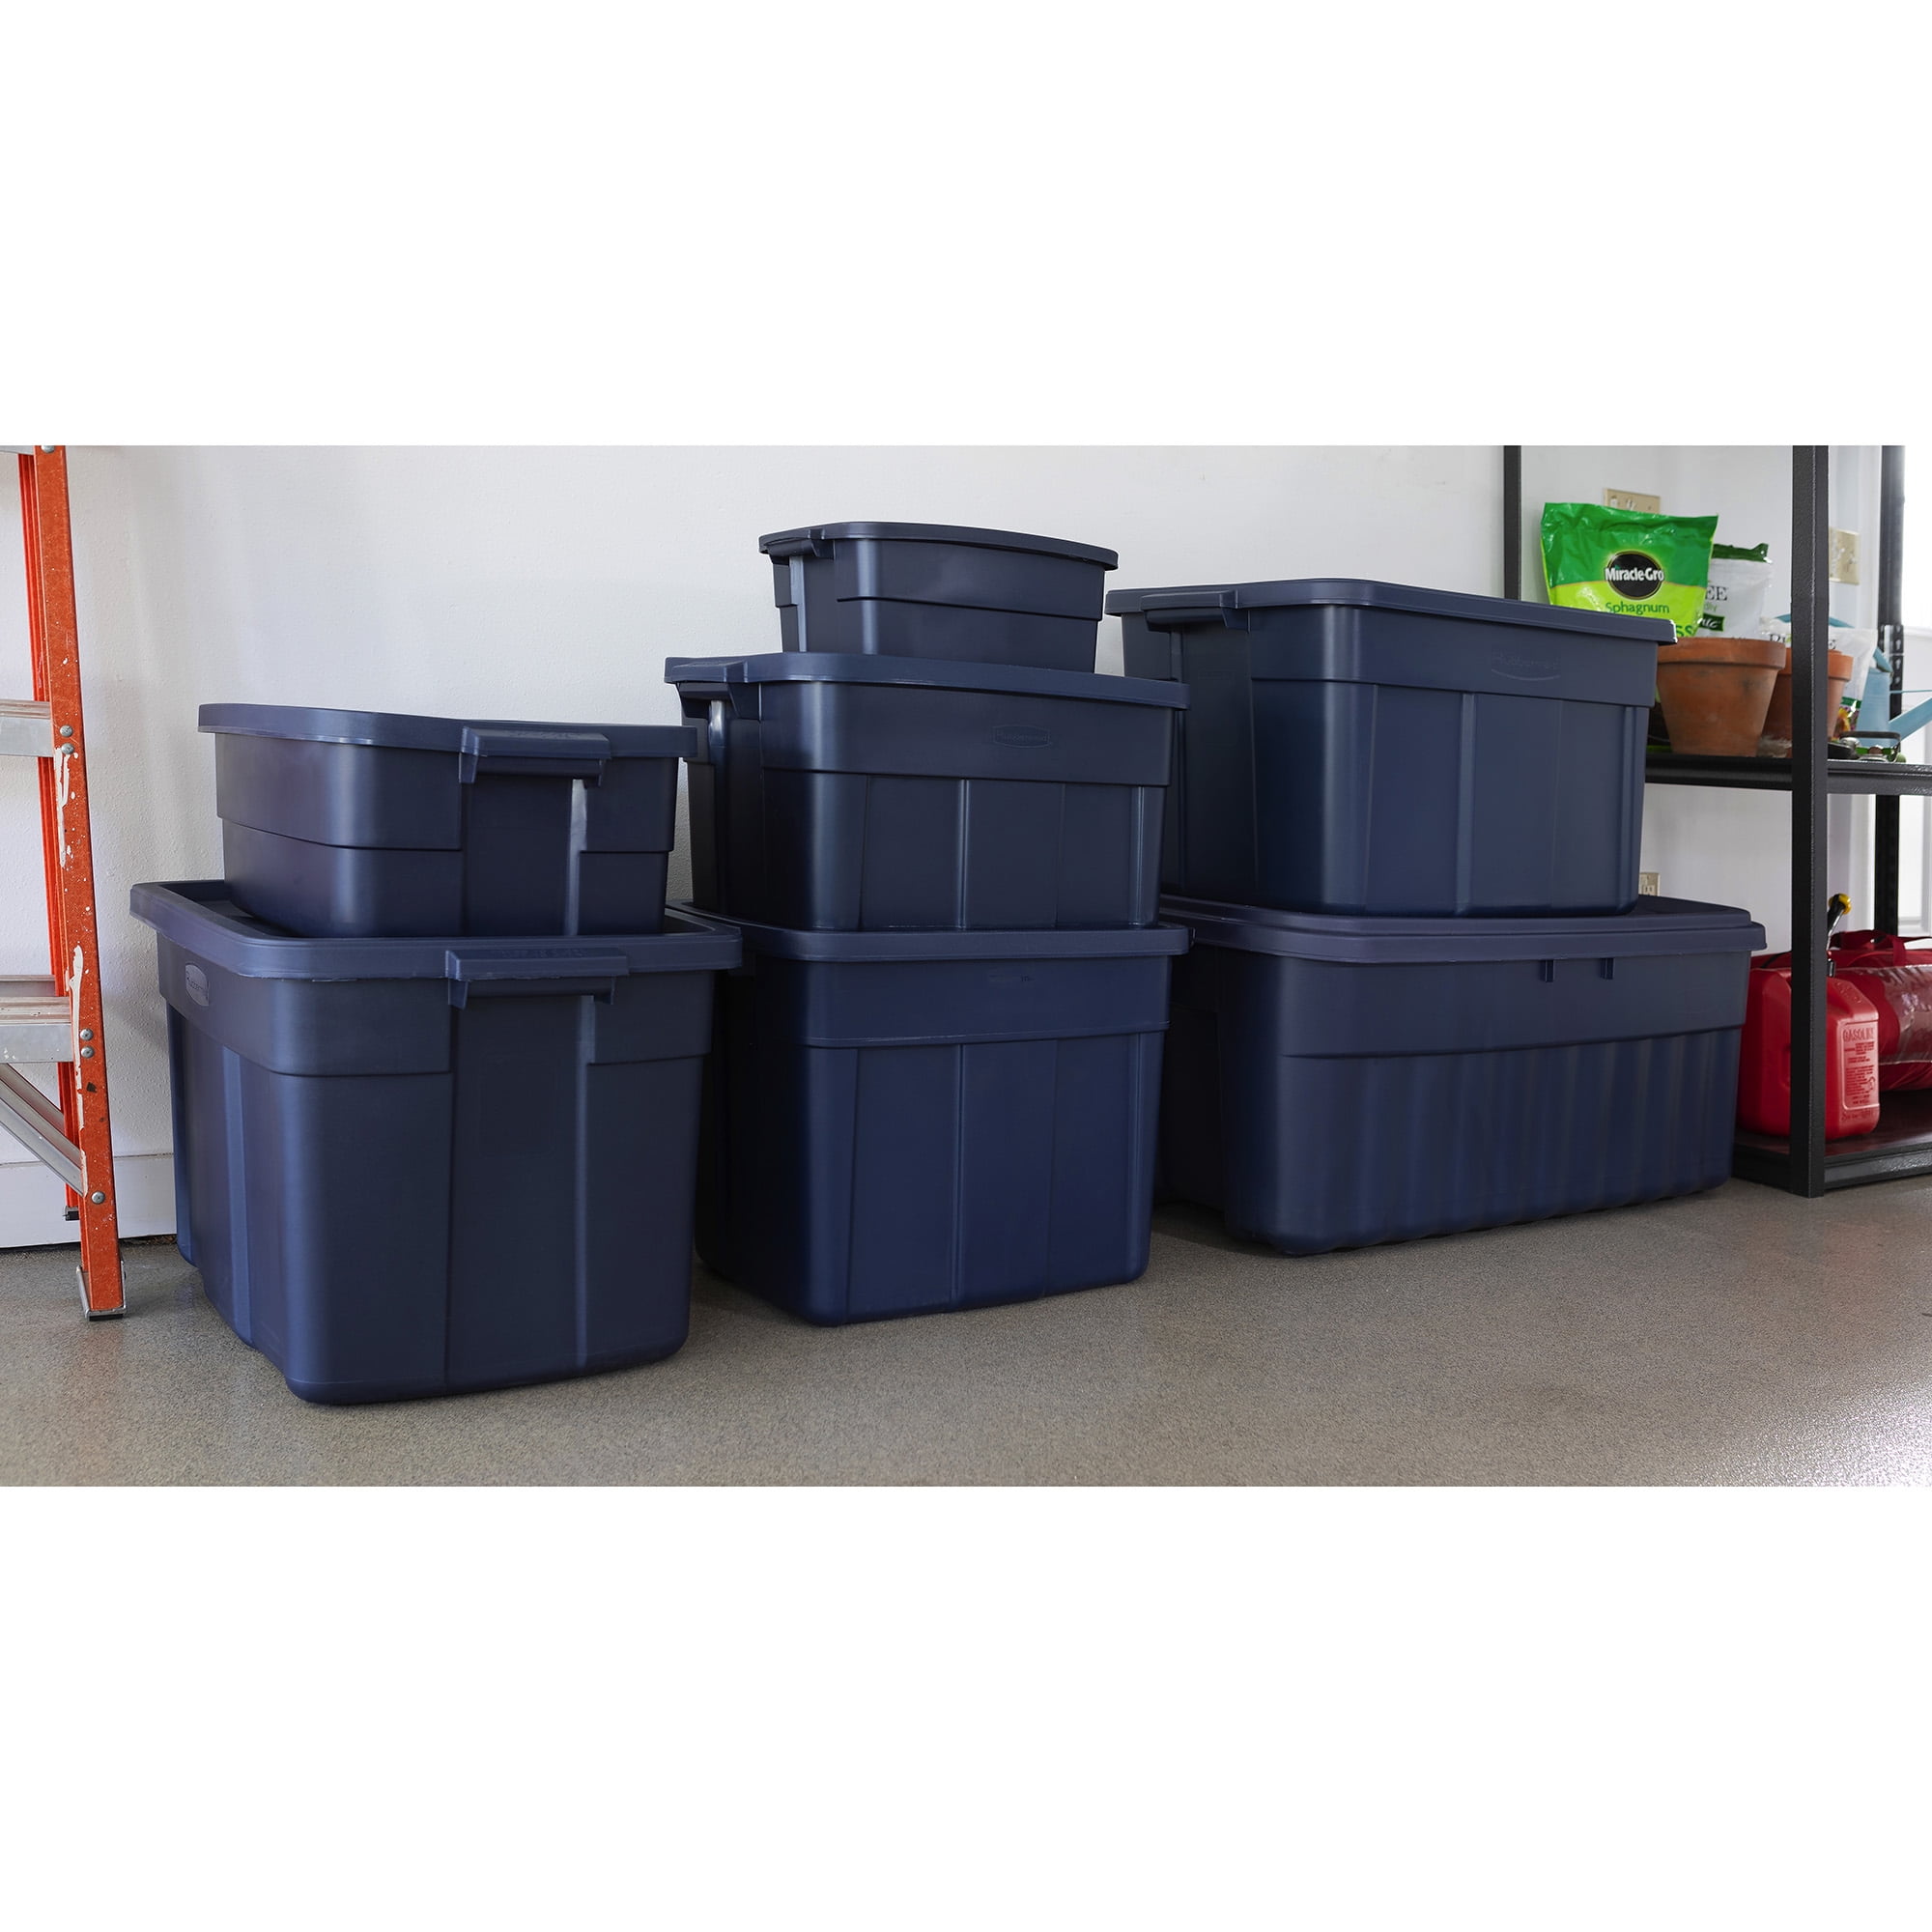 Rubbermaid Roughneck Tote 14 Gallon Storage Container, Heritage Blue (6  Pack), 1 Piece - City Market